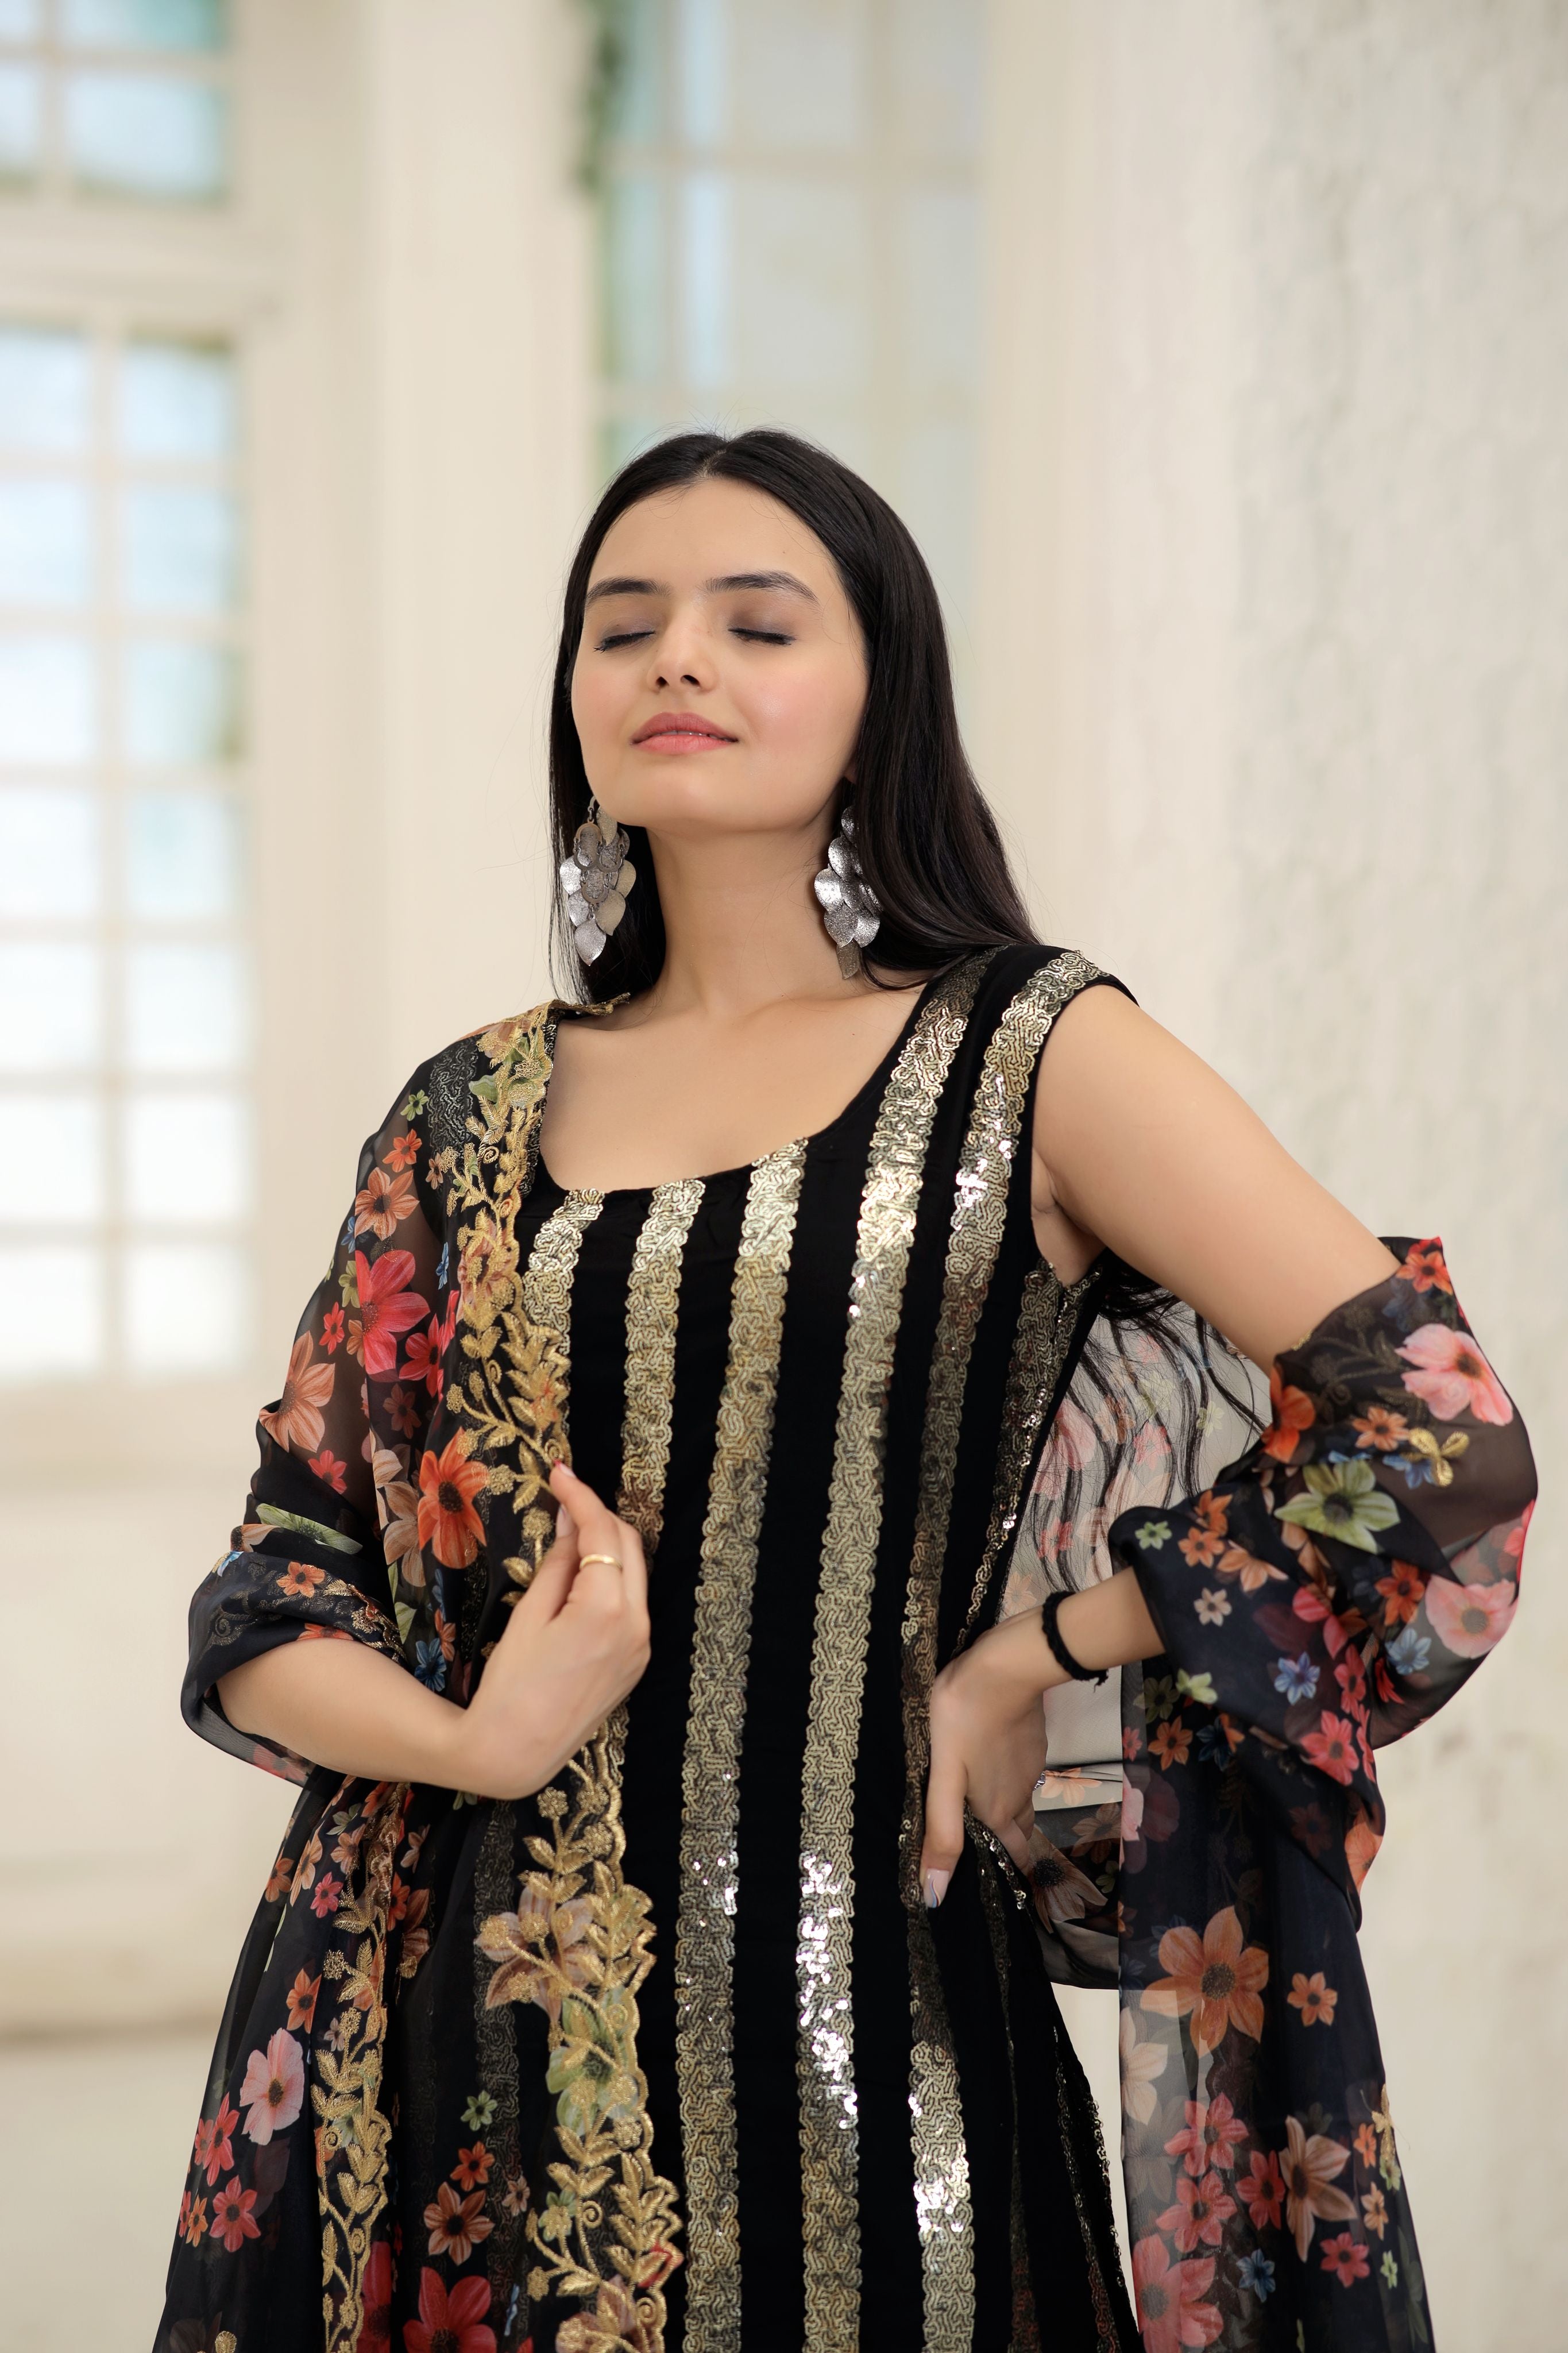 Faux Blooming With Line Sequins Embroidered work Kurti Sharara Set